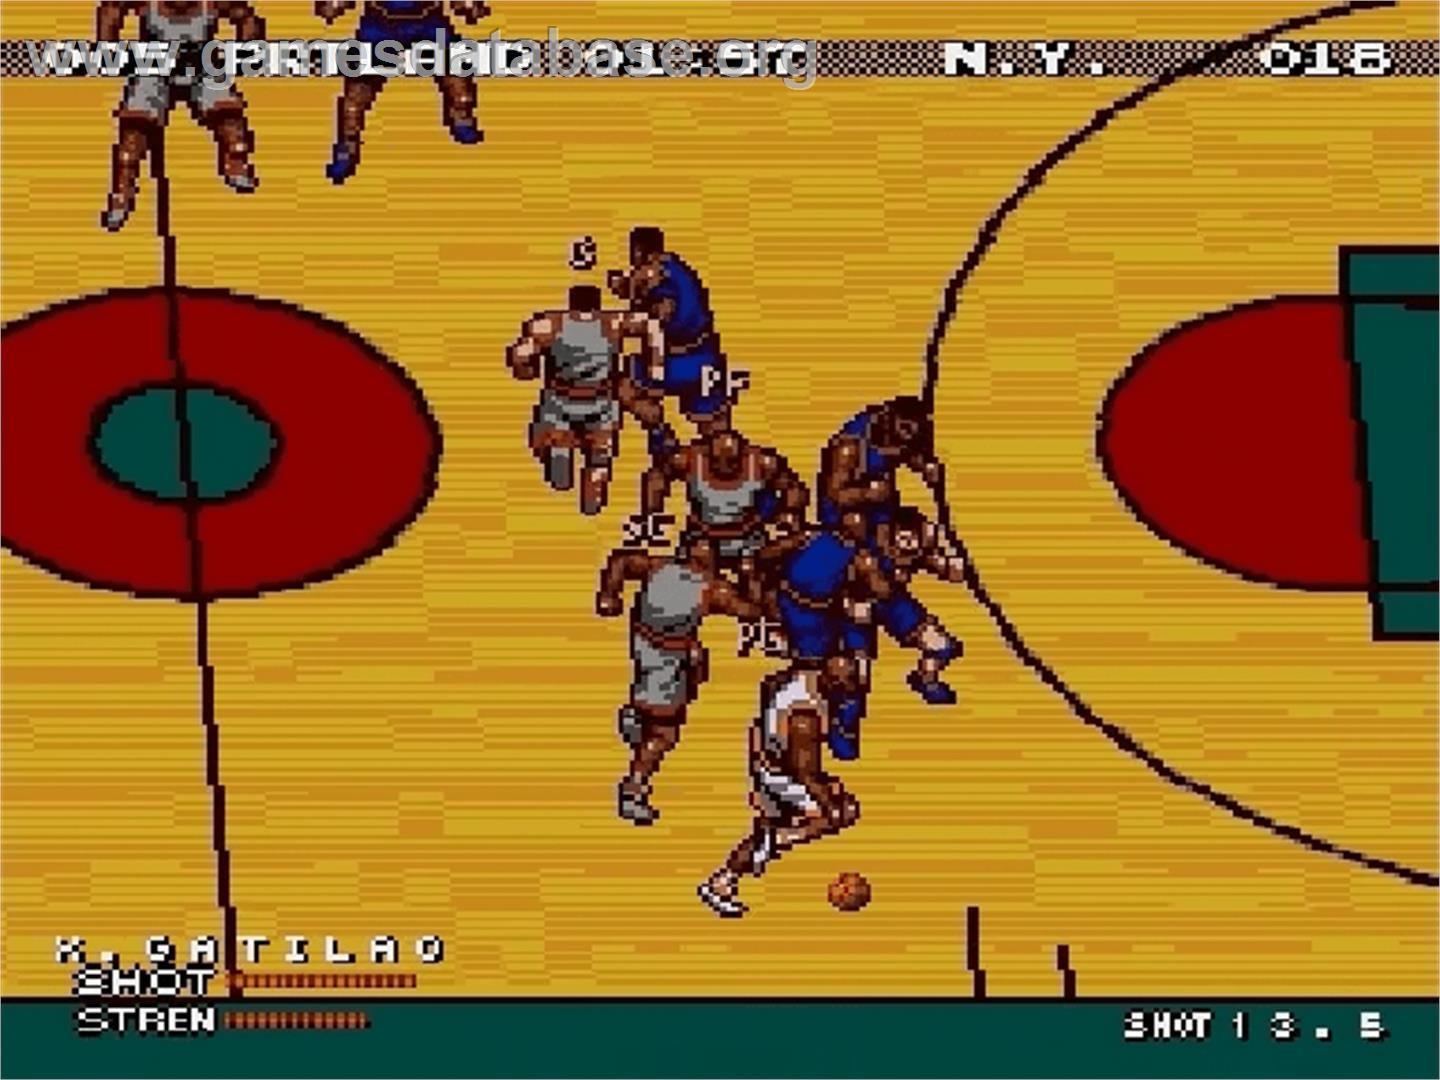 Double Dribble: The Playoff Edition - Sega Genesis - Artwork - In Game